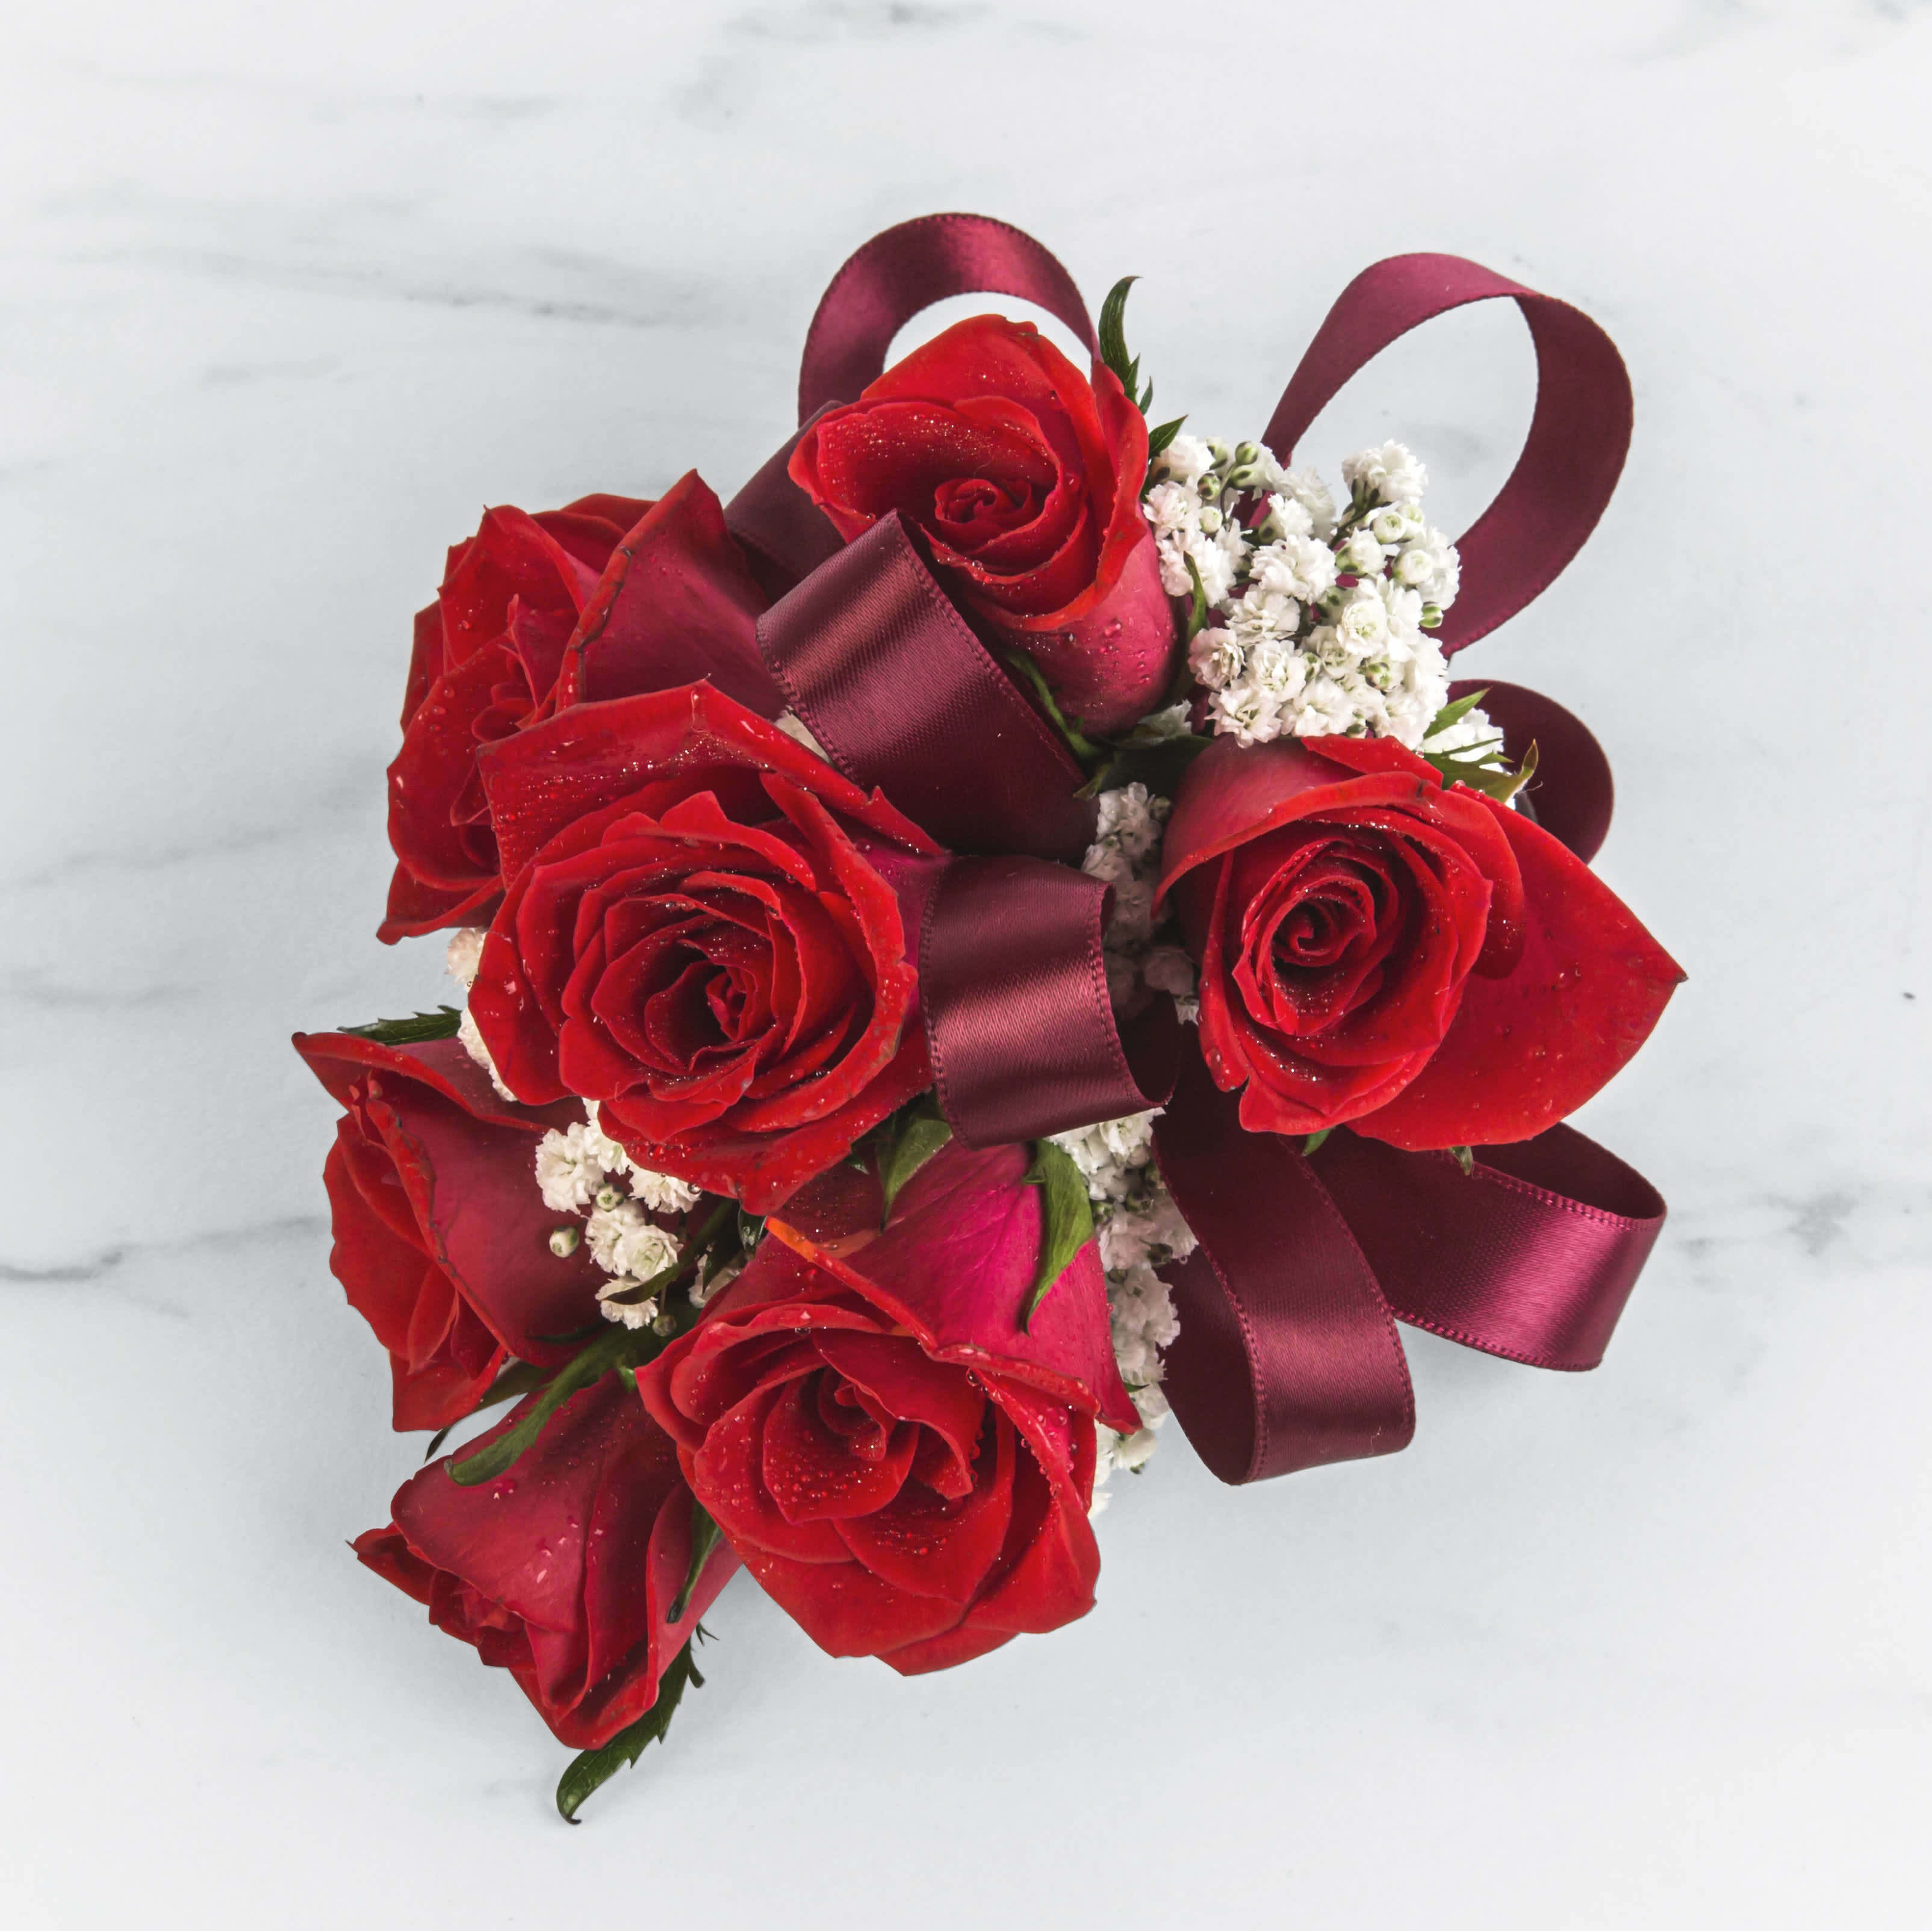 Red Rose Corsage by BloomNation™ - A classic red rose and baby's breath corsage compliments any outfit. Perfect for prom, formal, and weddings.